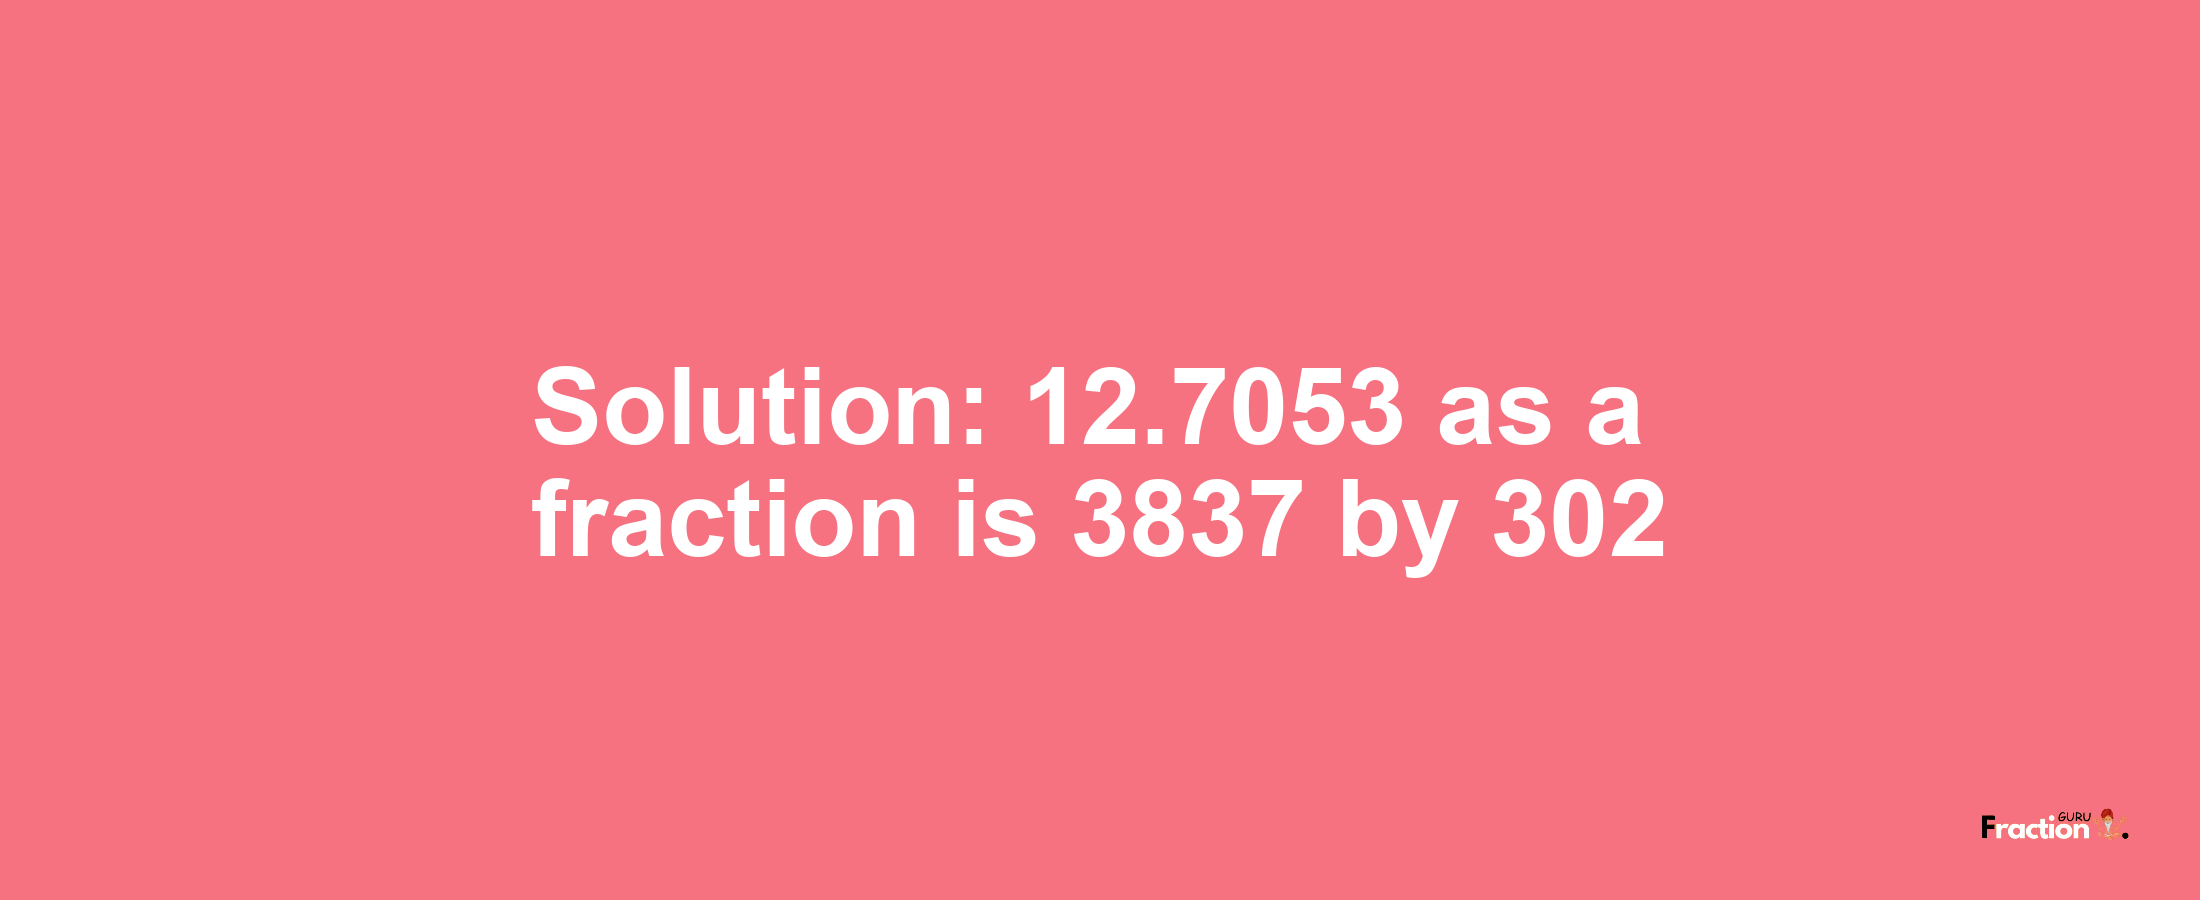 Solution:12.7053 as a fraction is 3837/302